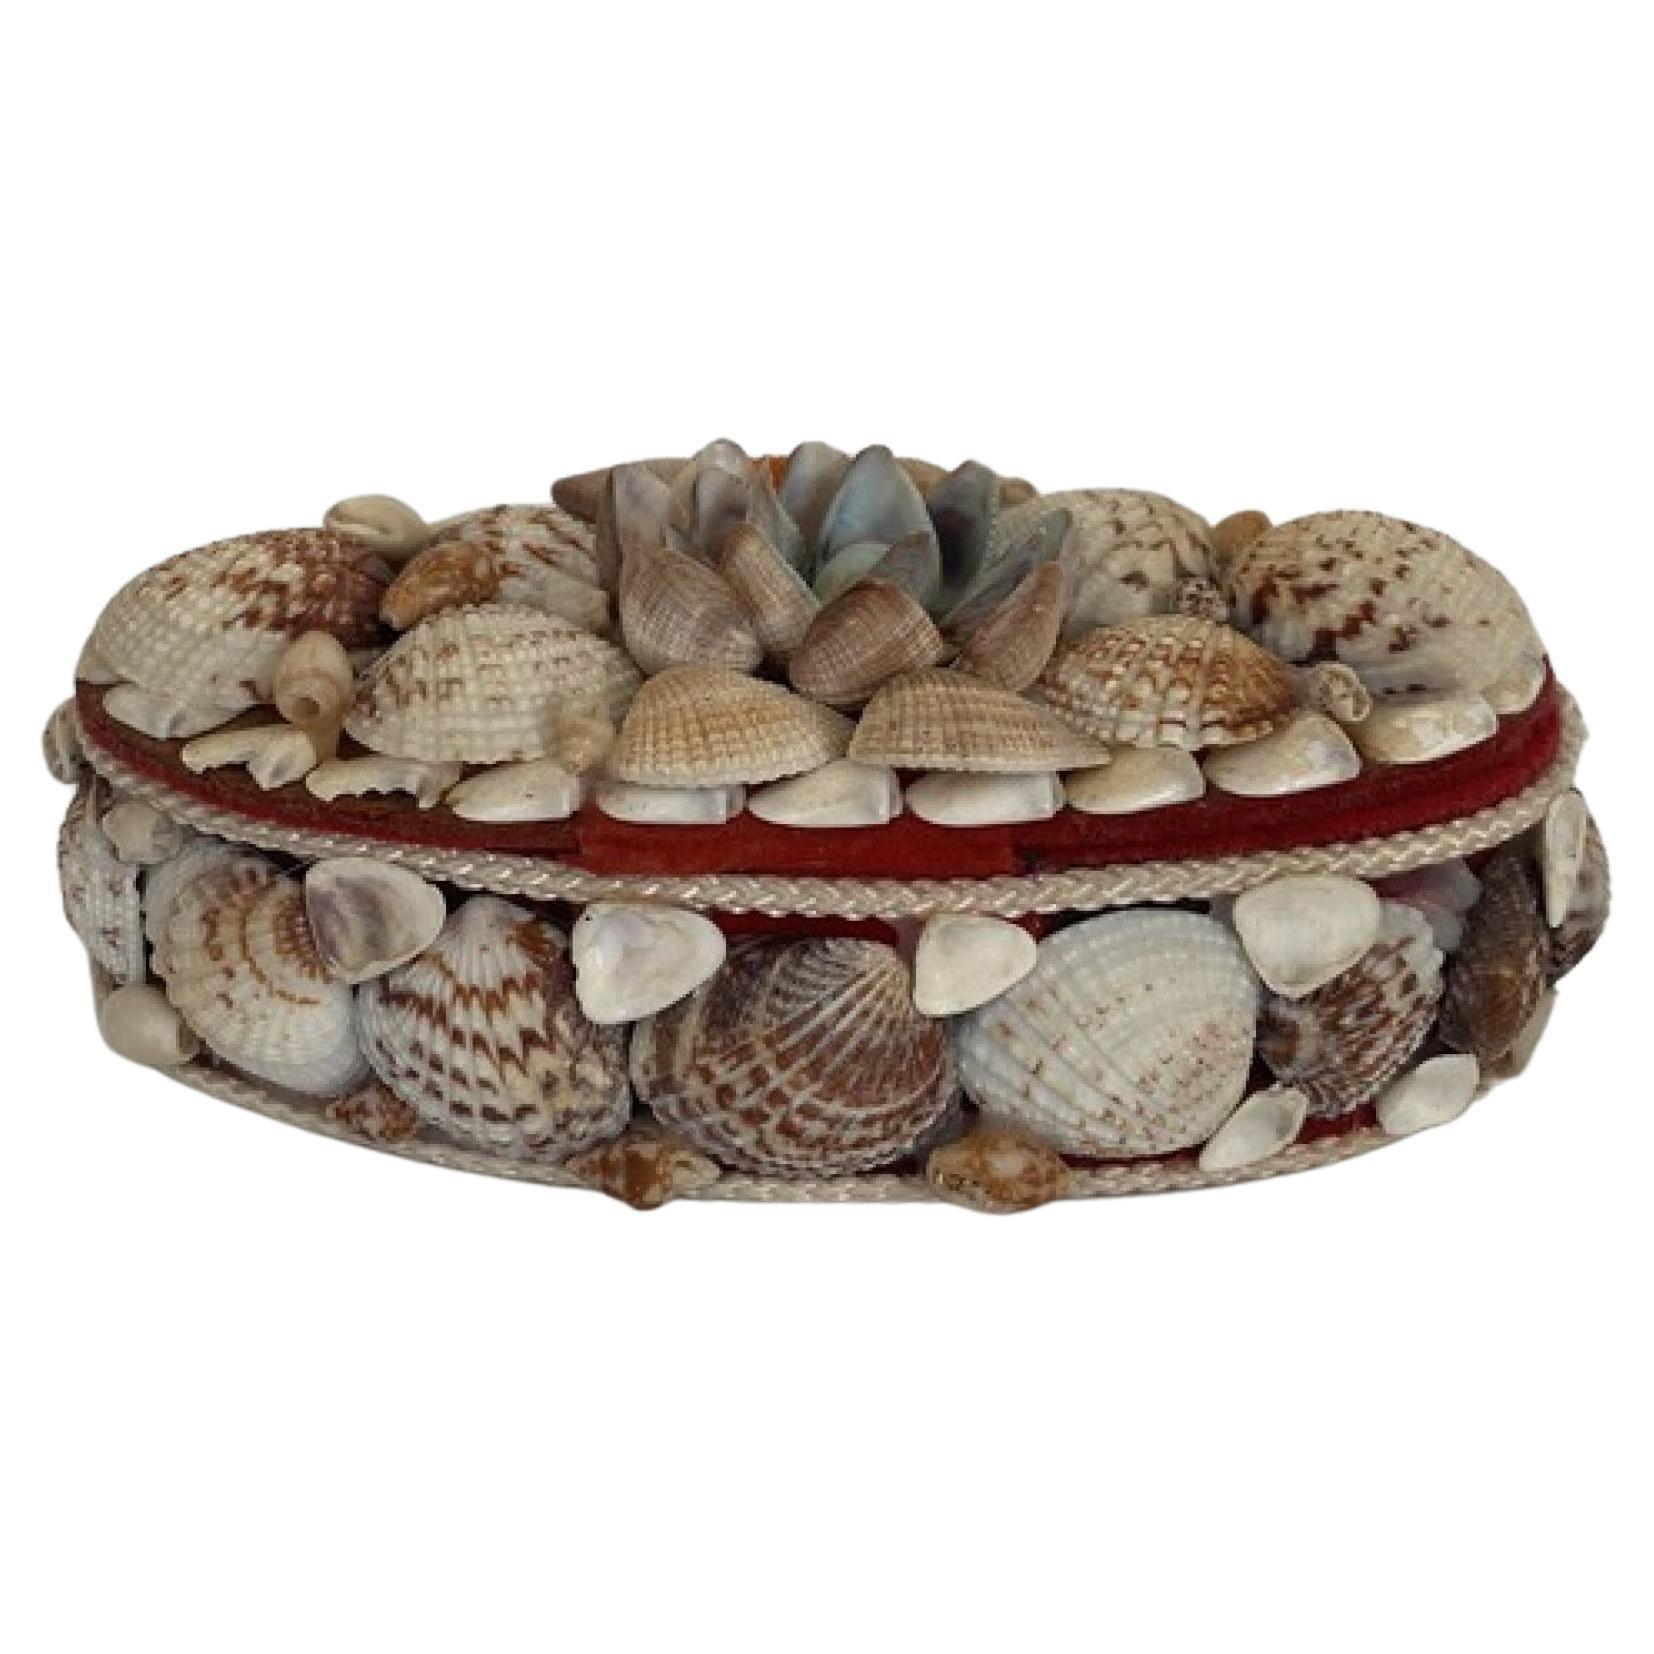 Contemporary American Modern Oval Seashell Jewelry Box For Sale